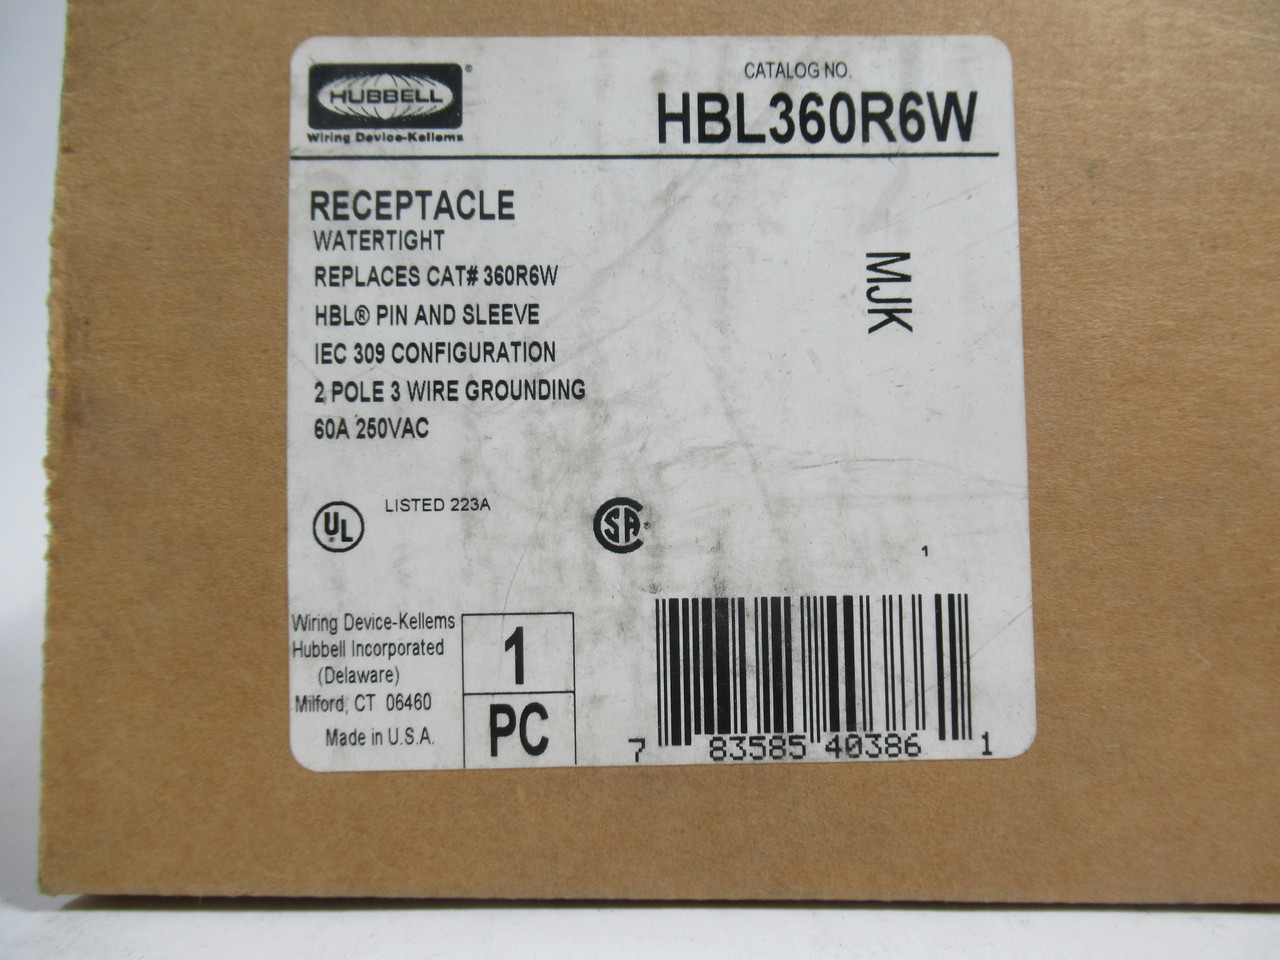 Hubbell HBL360R6W Watertight Receptacle 60A 250VAC 3-Wire 2-Pole NEW